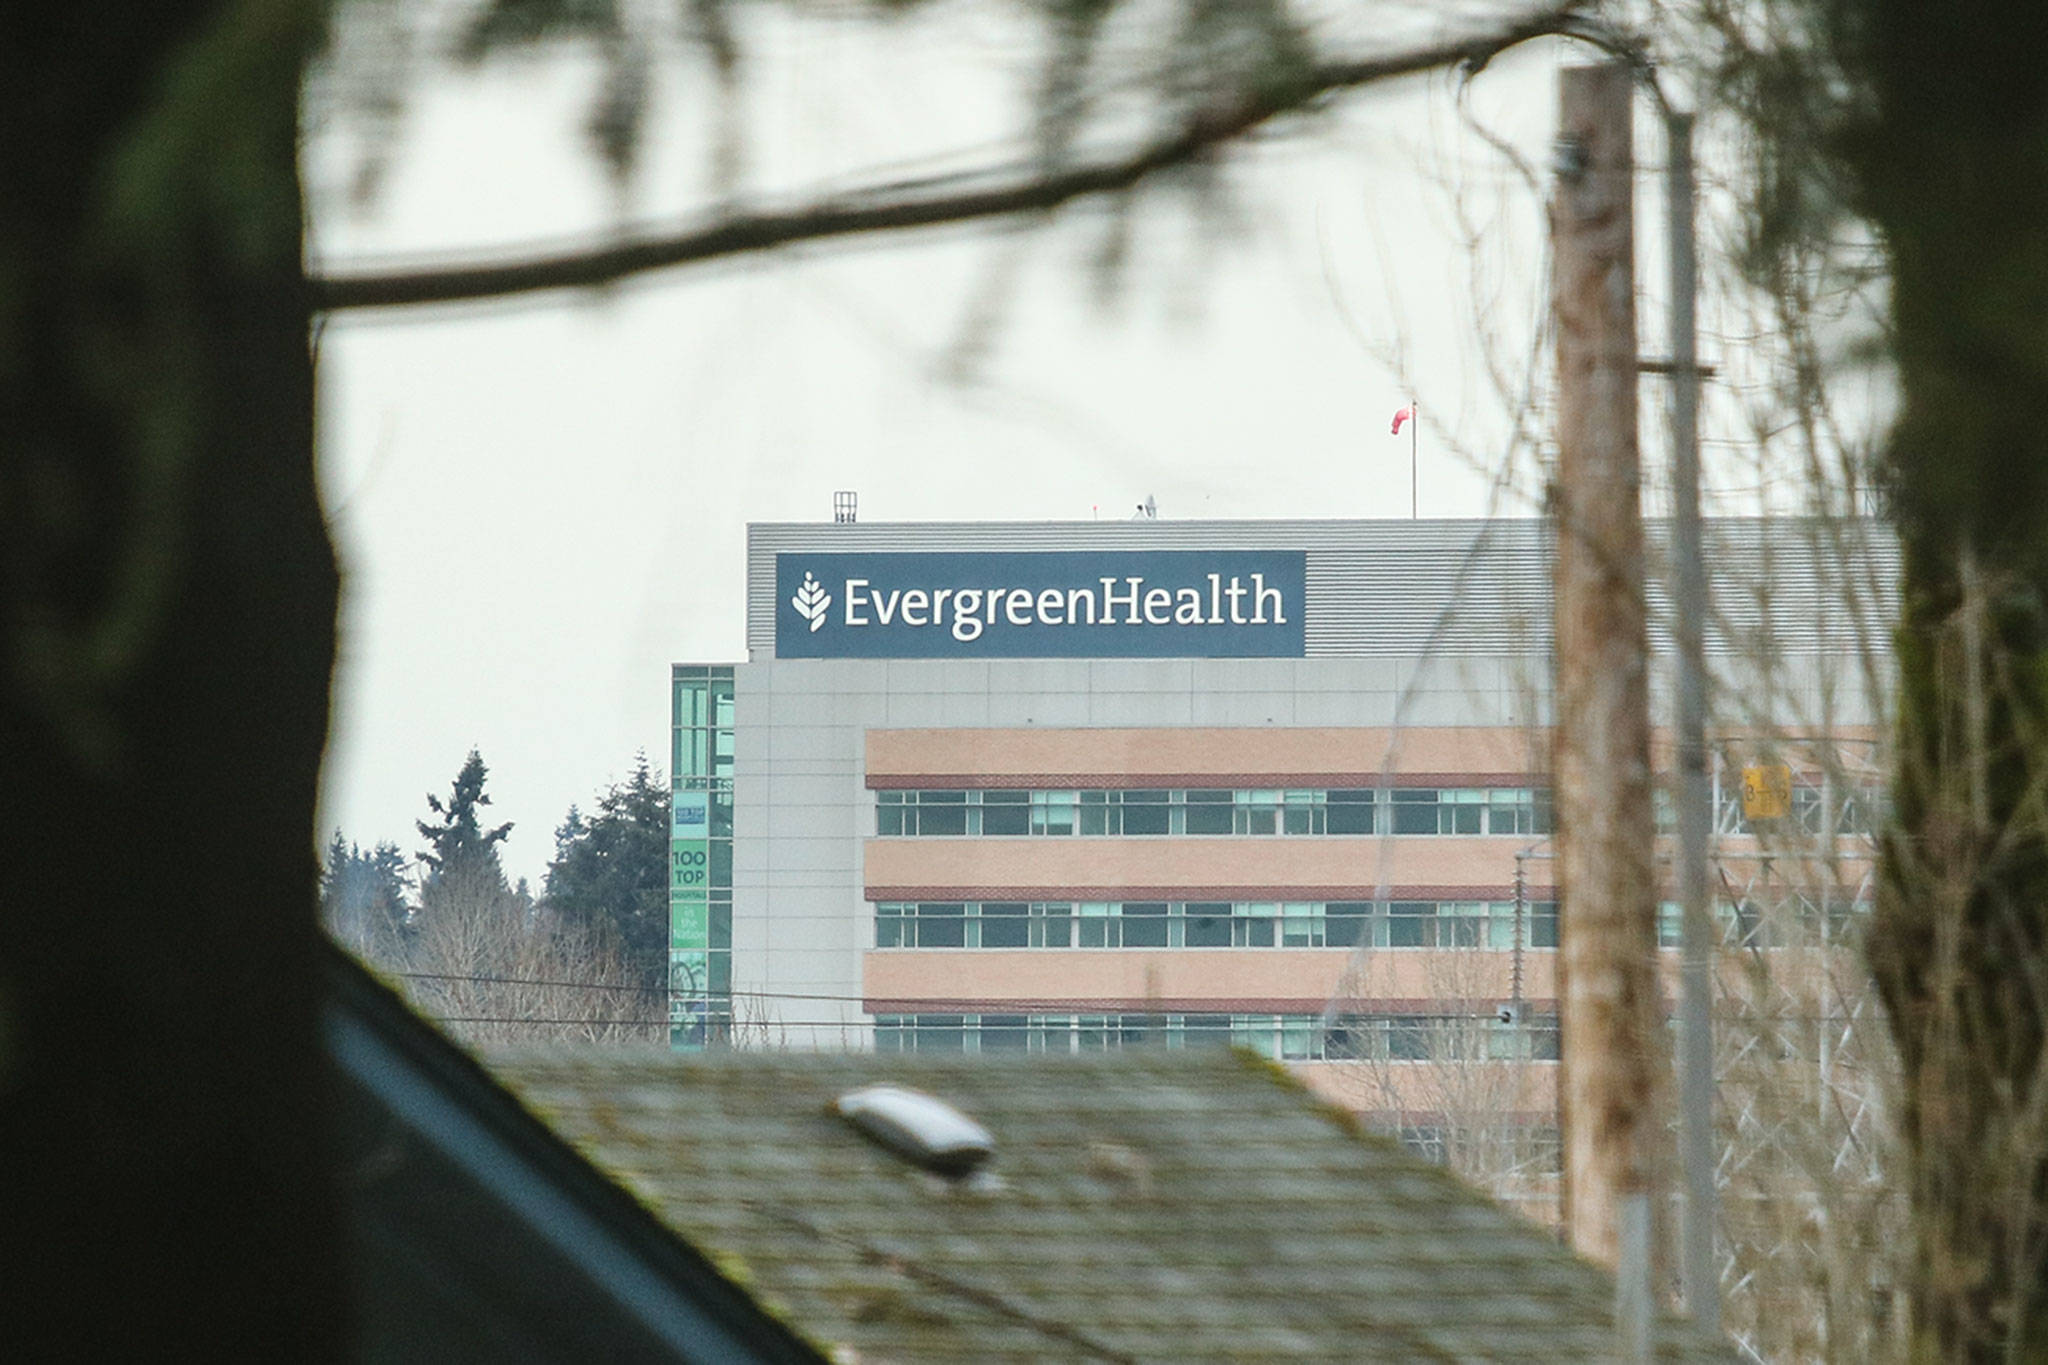 EvergreenHealth implements UV technology to help fight infection-causing pathogens, enhancing hospital safety